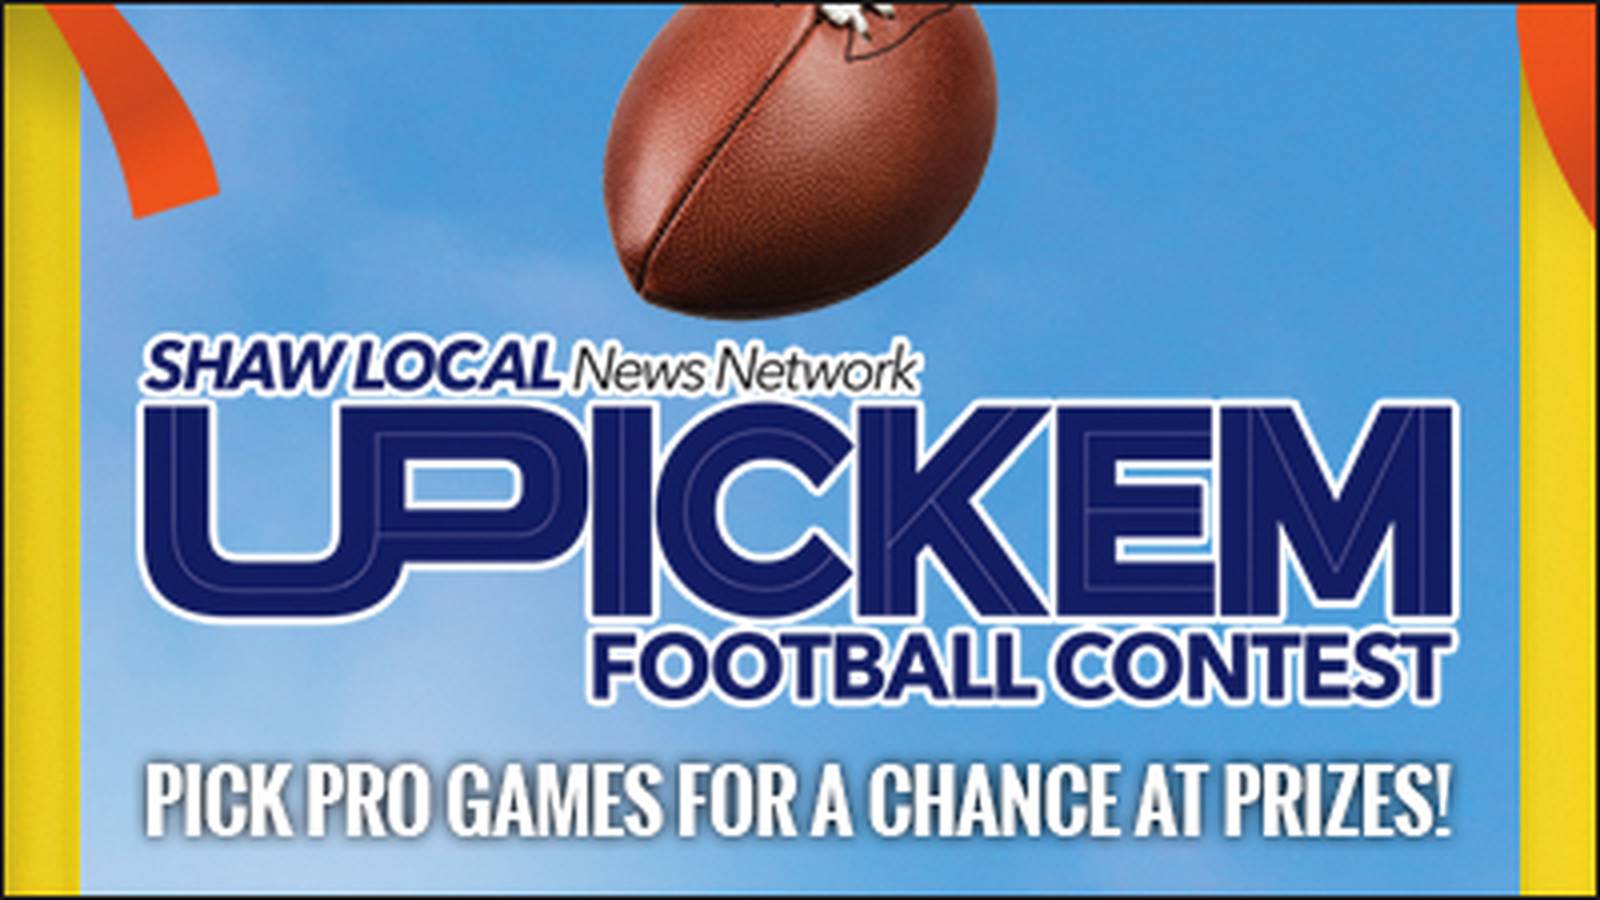 Lake County, the ultimate pro football contest is back! Shaw Local